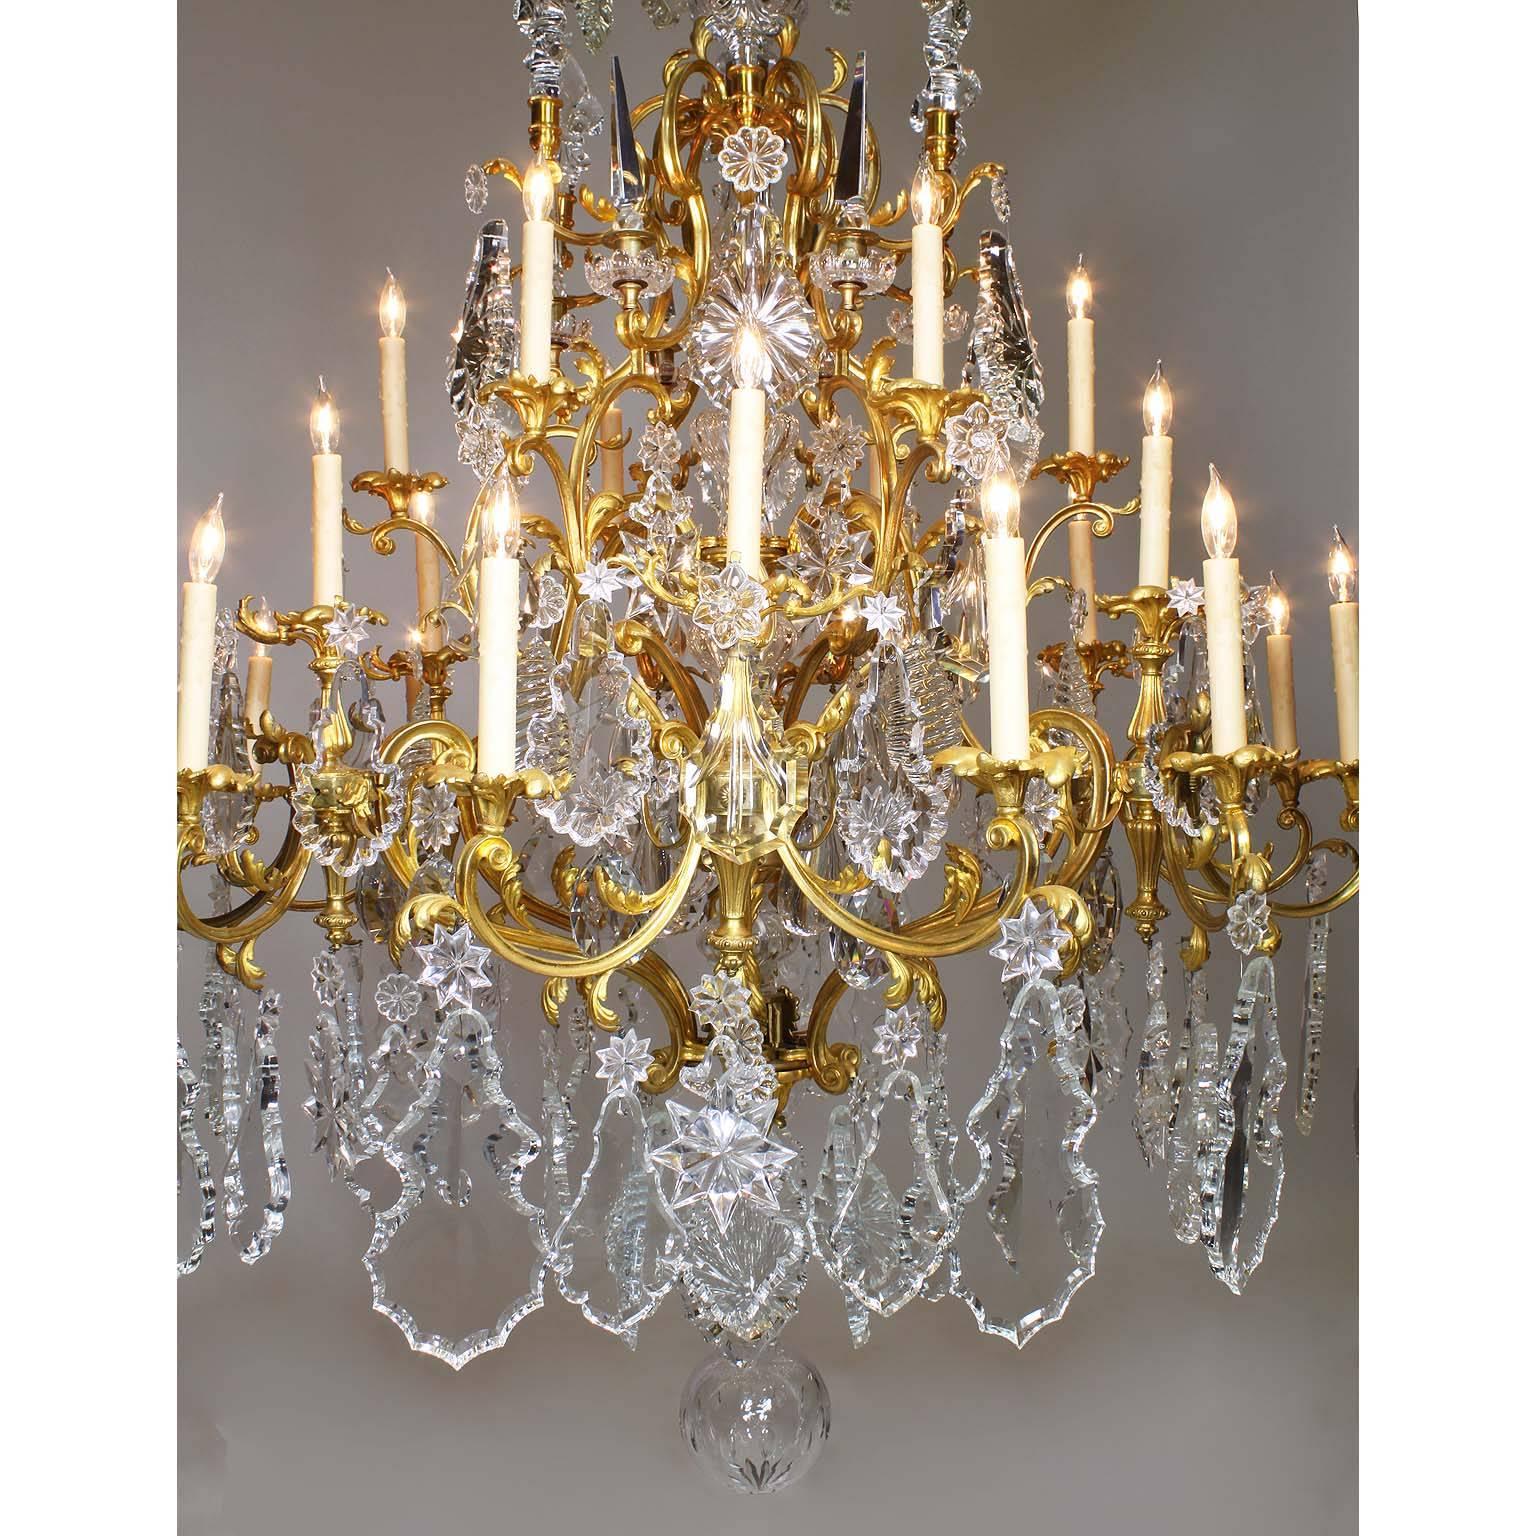 French 19th Century Louis XV Style Gilt-Bronze Crystal Chandelier Attr. Baccarat For Sale 2